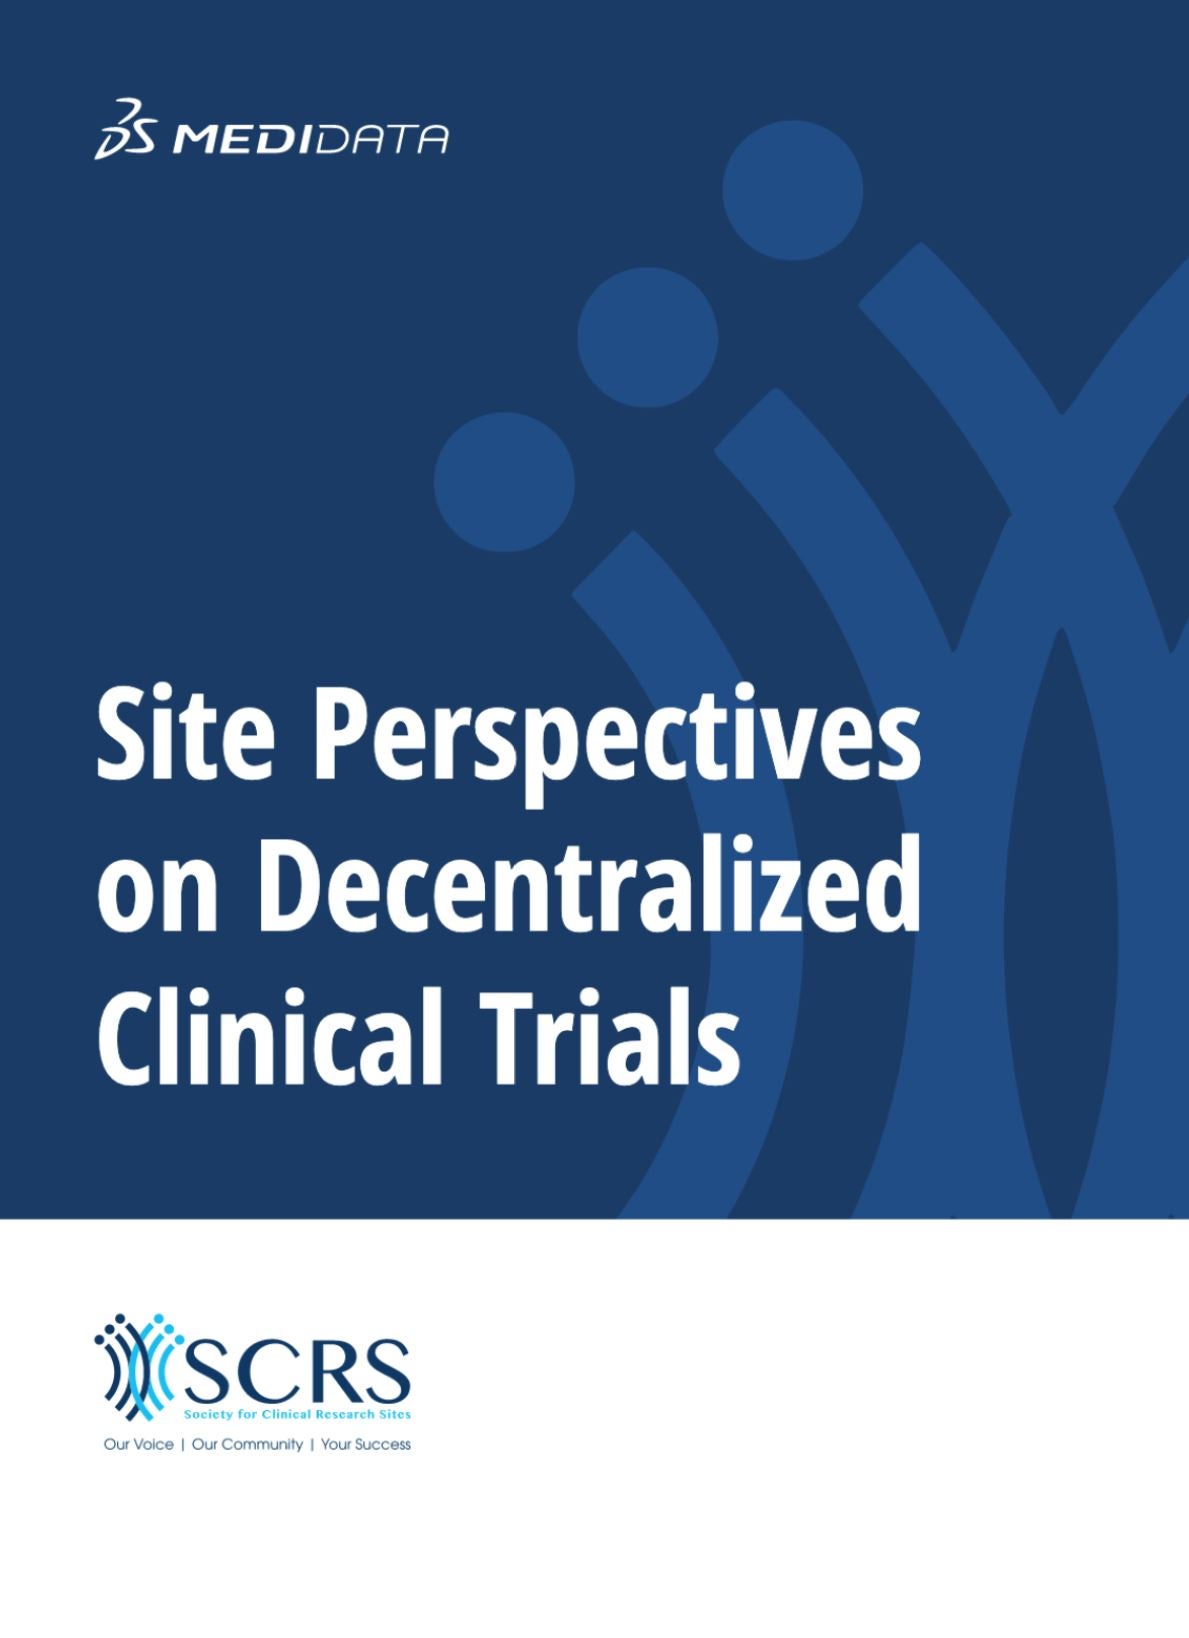 Site Perspectives on Decentralized Clinical Trials